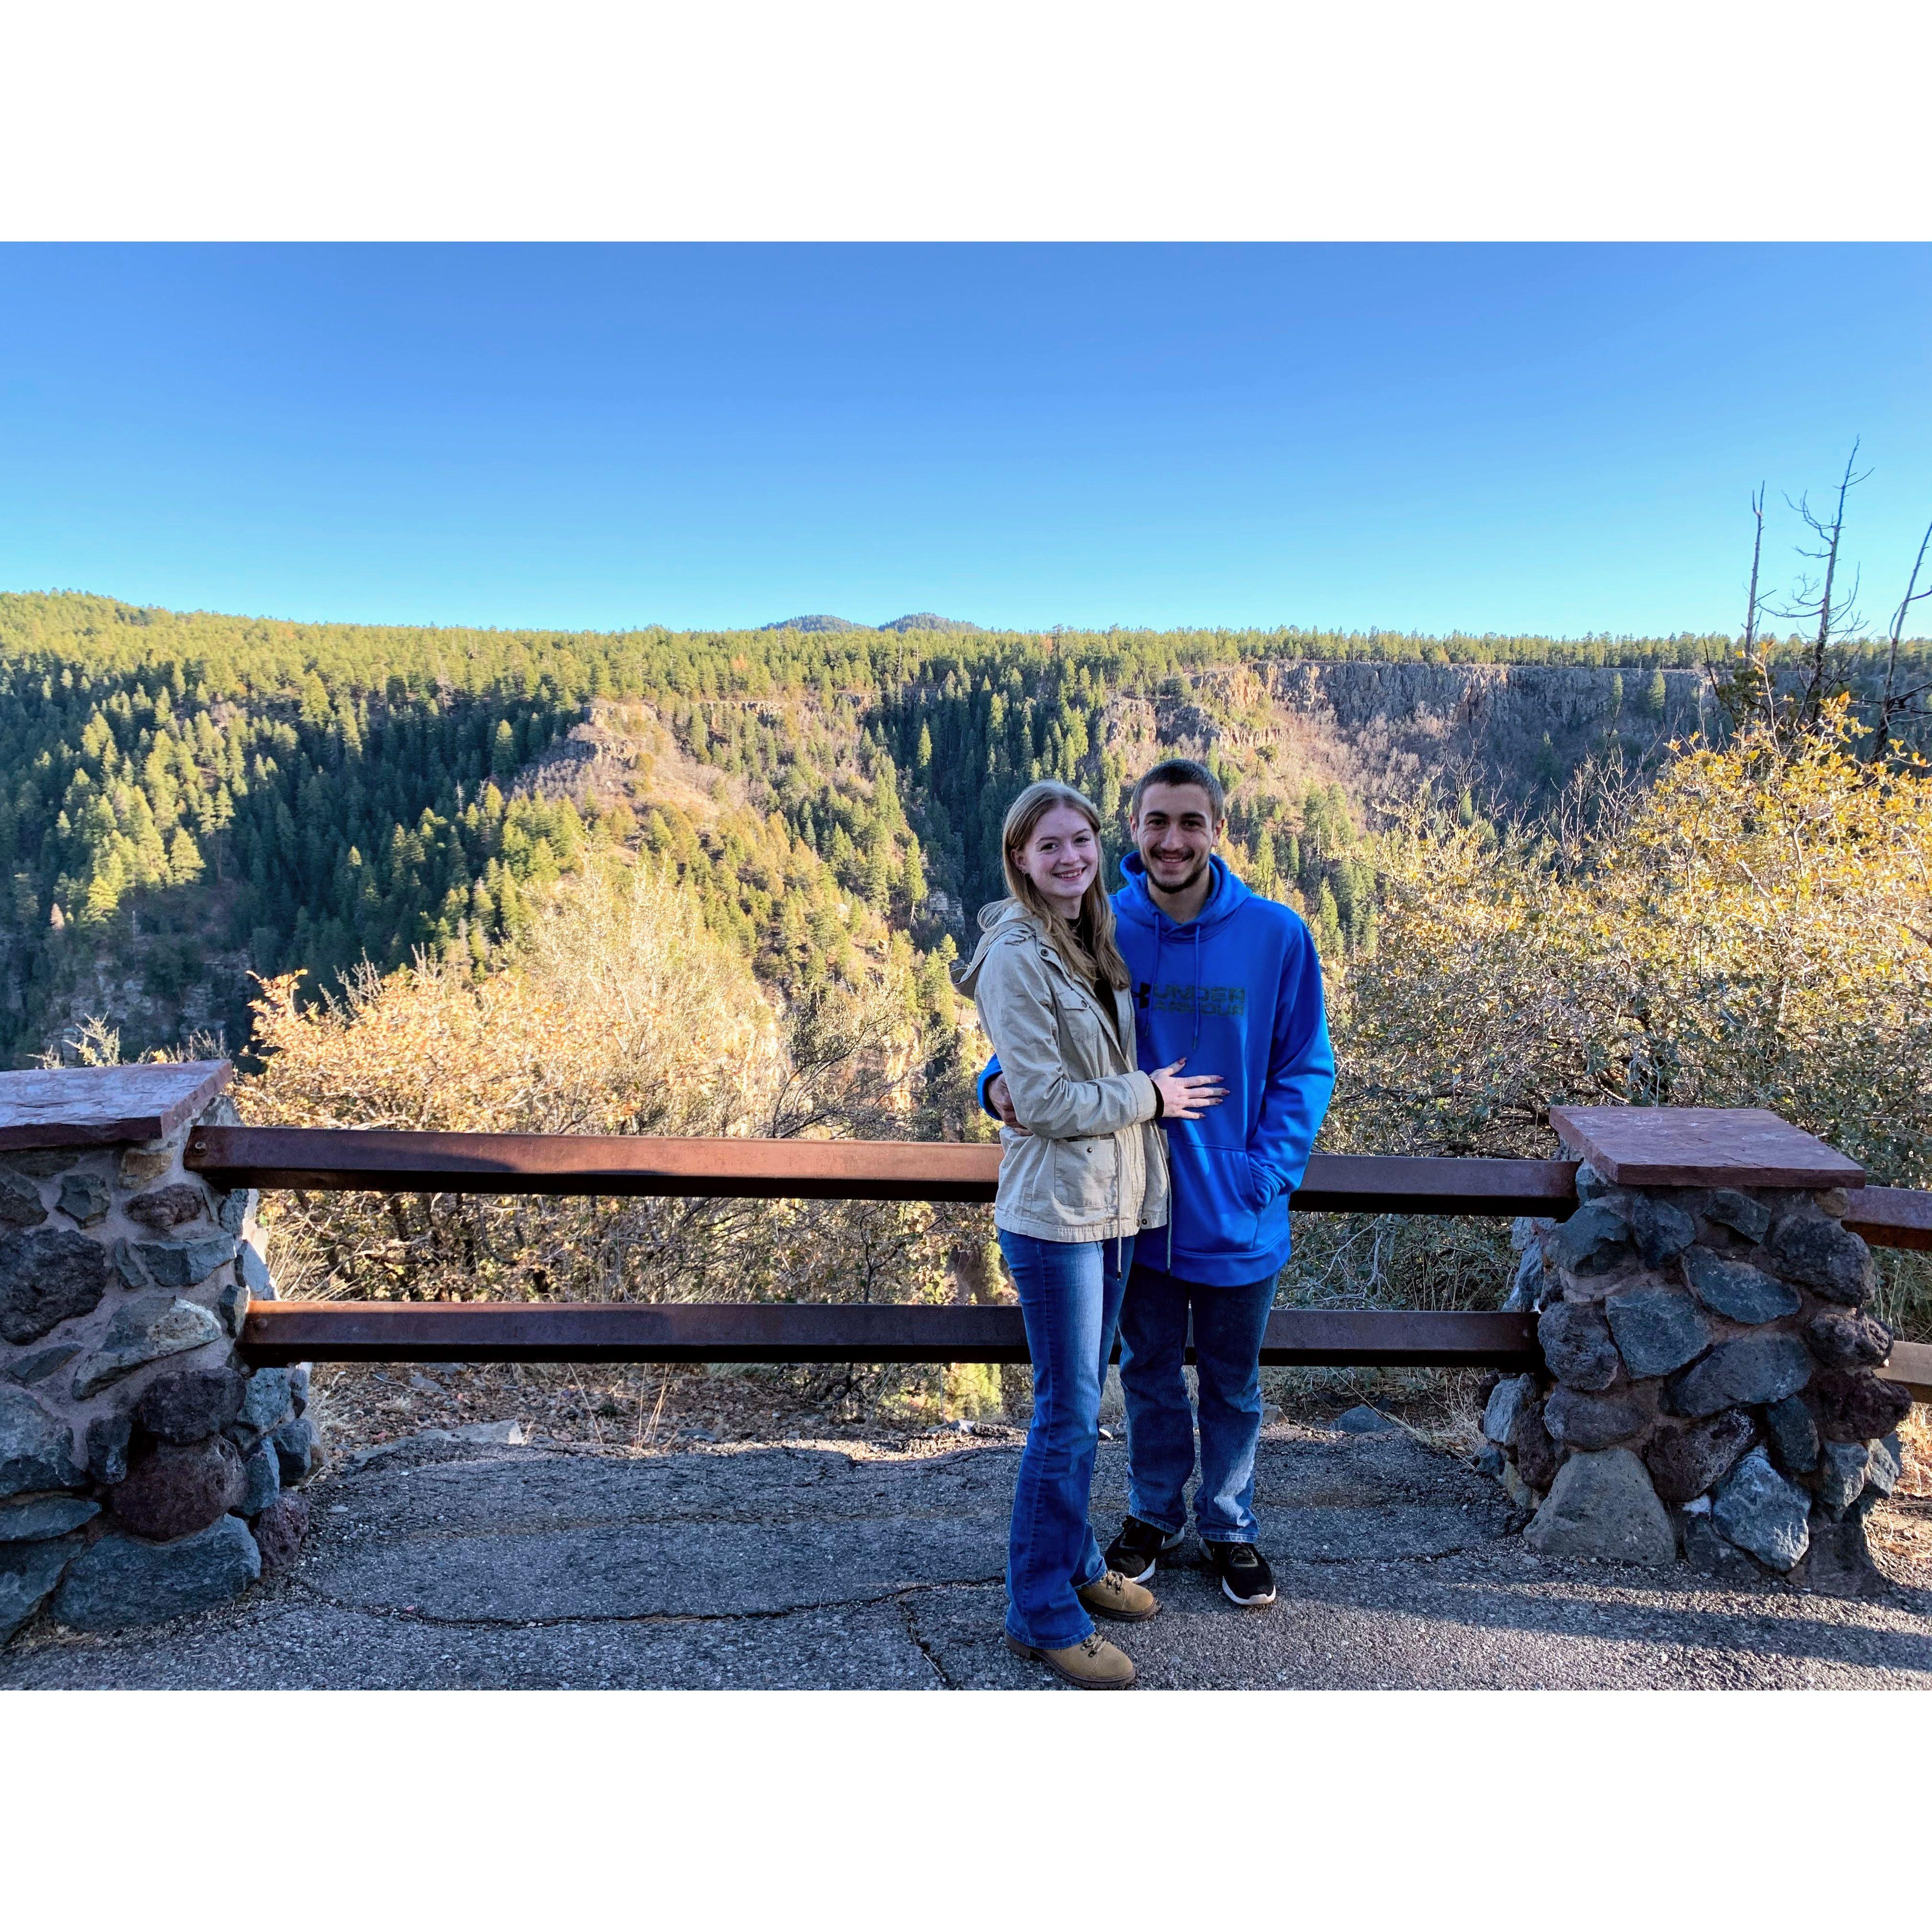 Alec proposed on a hike in Sedona, Arizona in December 2019.